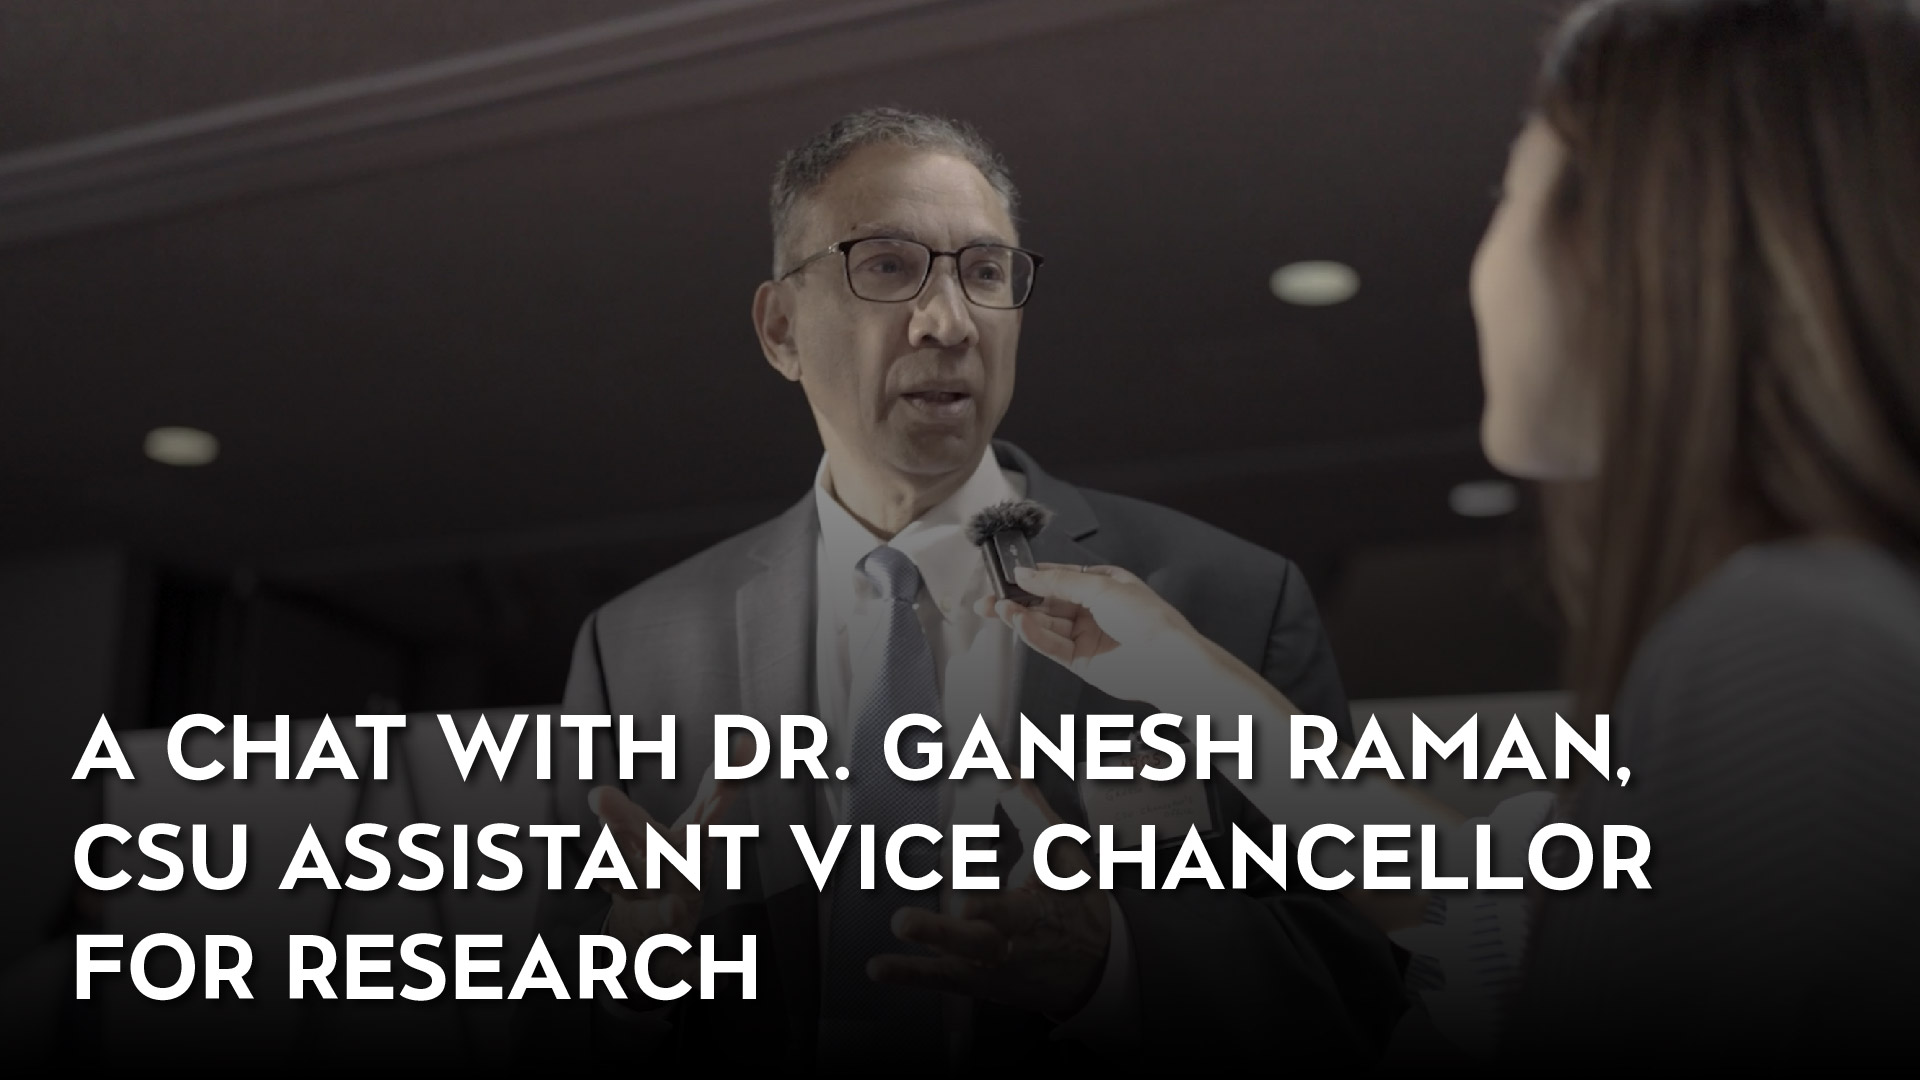 'A Chat with Dr. Ganesh Raman, CSU Assistant Vice Chancellor for Research' Video Thumbnail